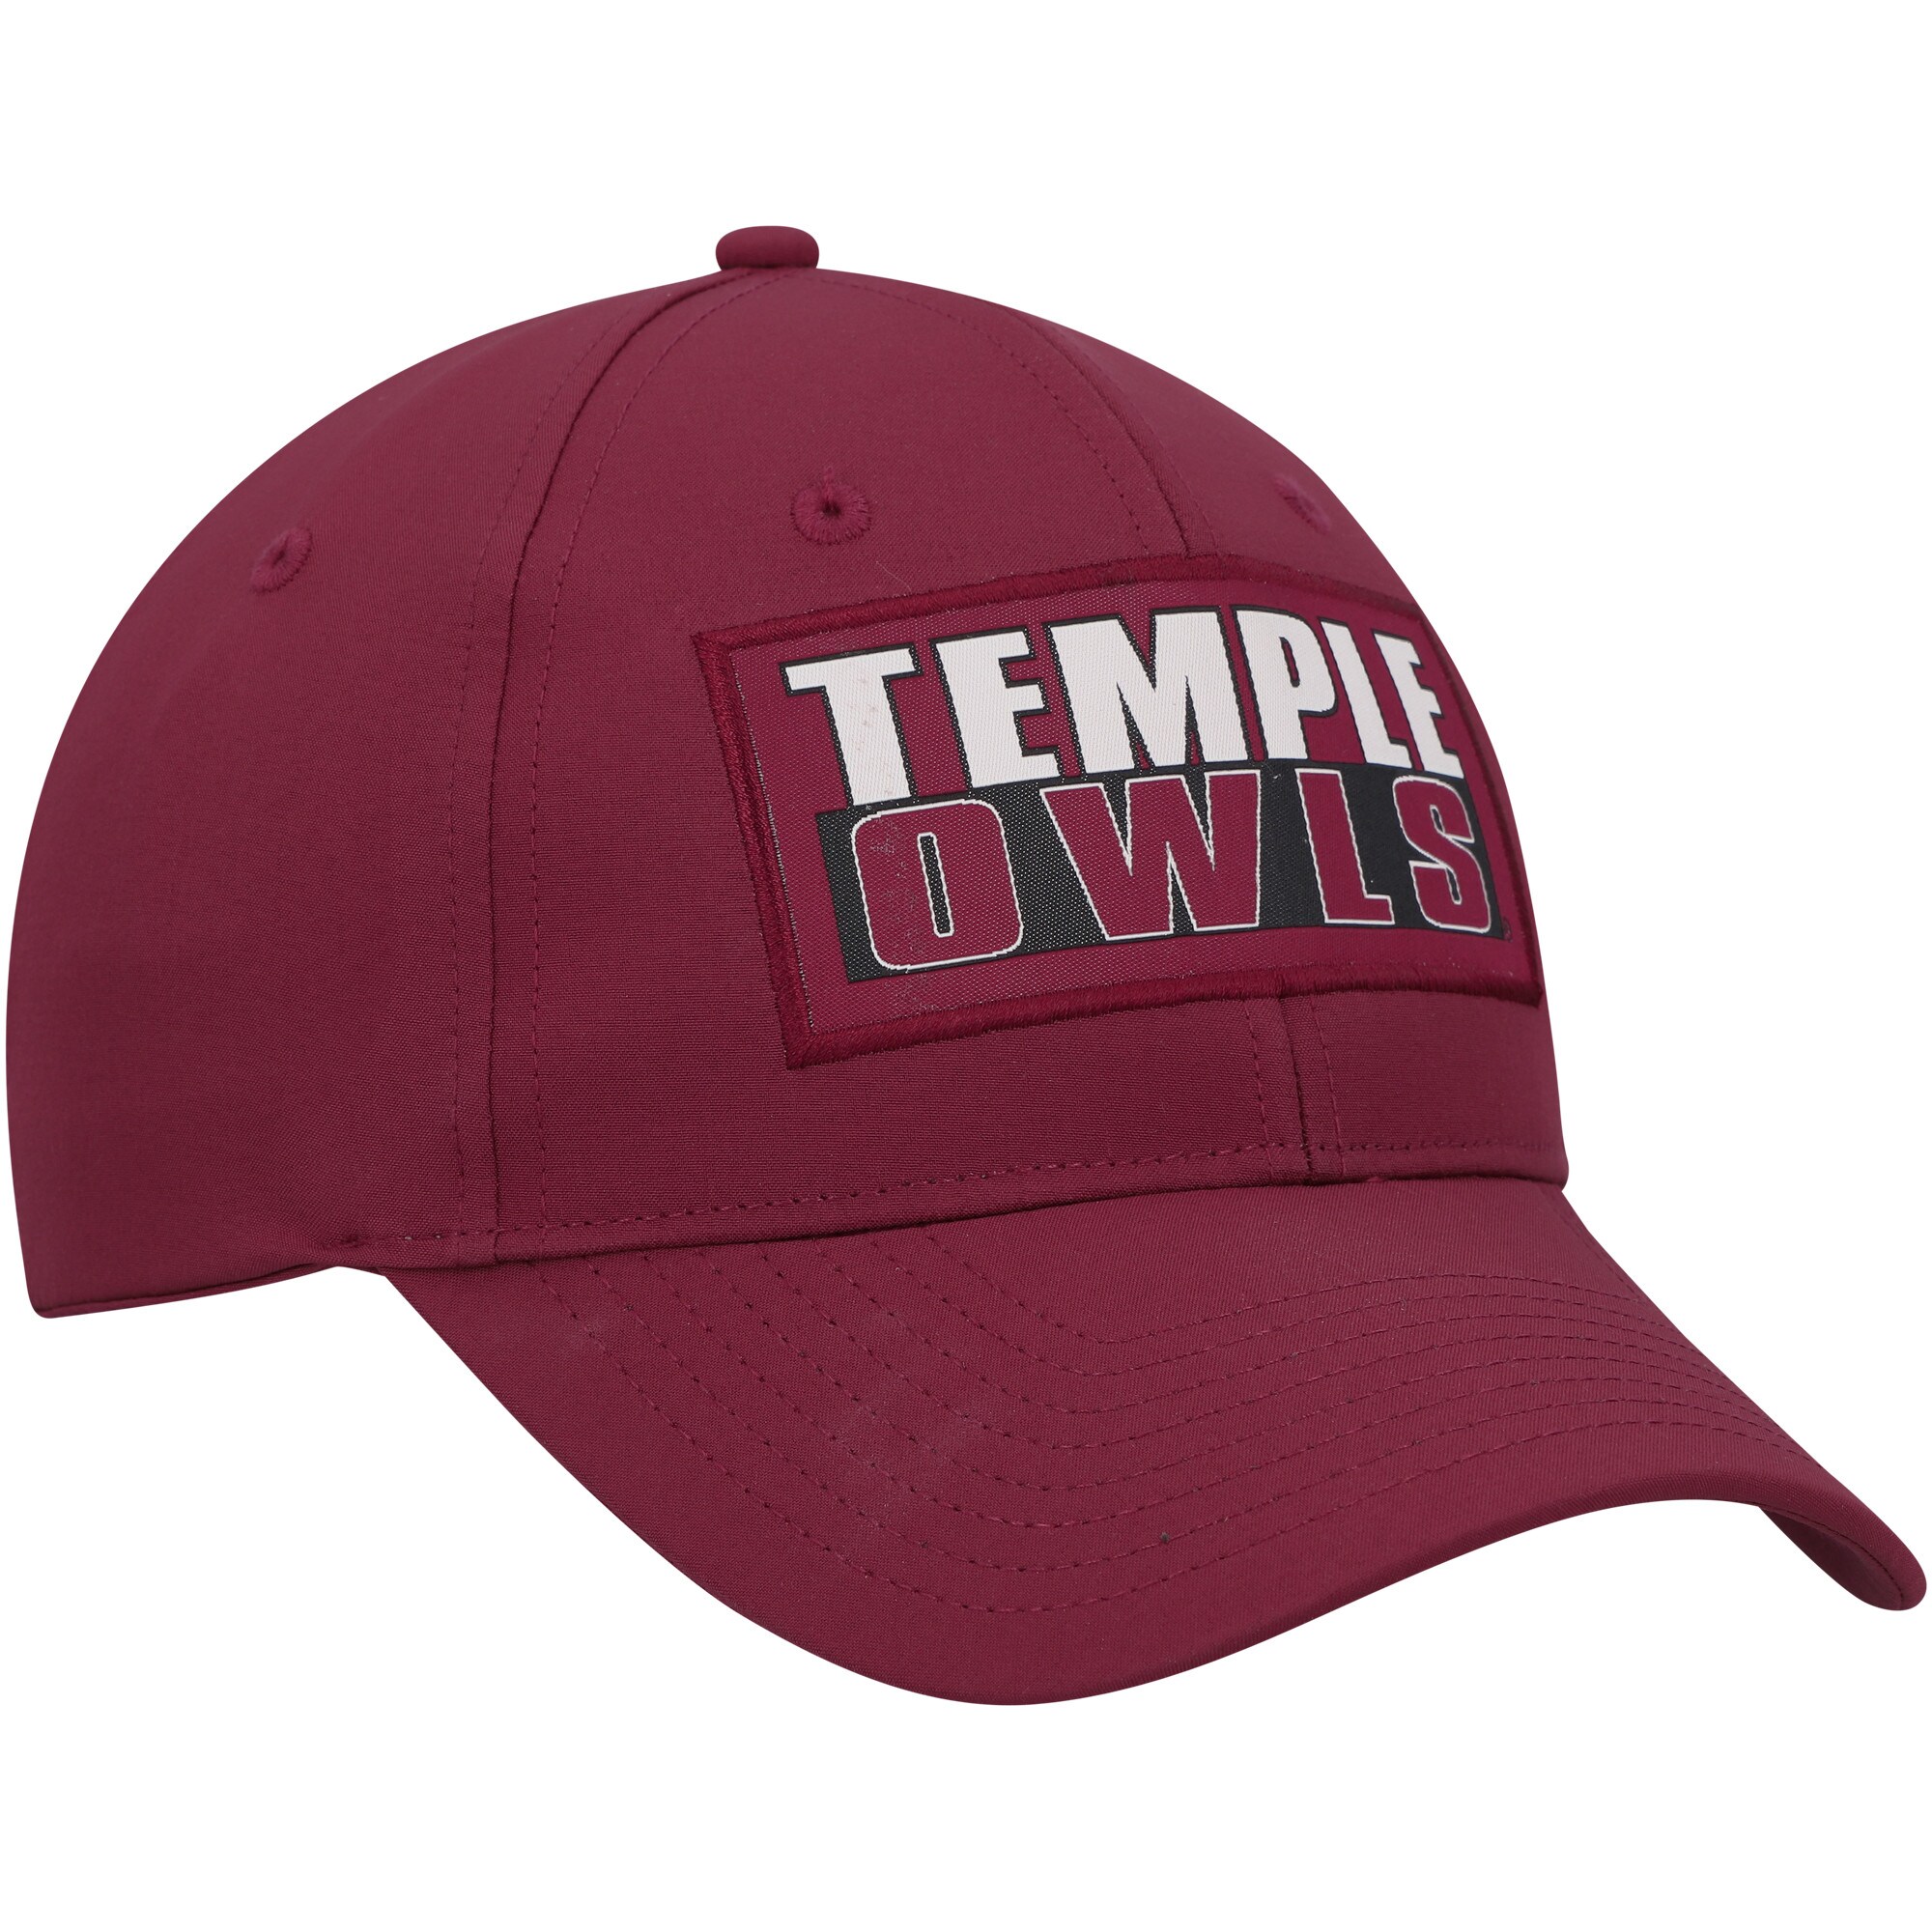 Men's Colosseum Cherry Temple Owls Positraction Snapback Hat - OSFA - image 3 of 4